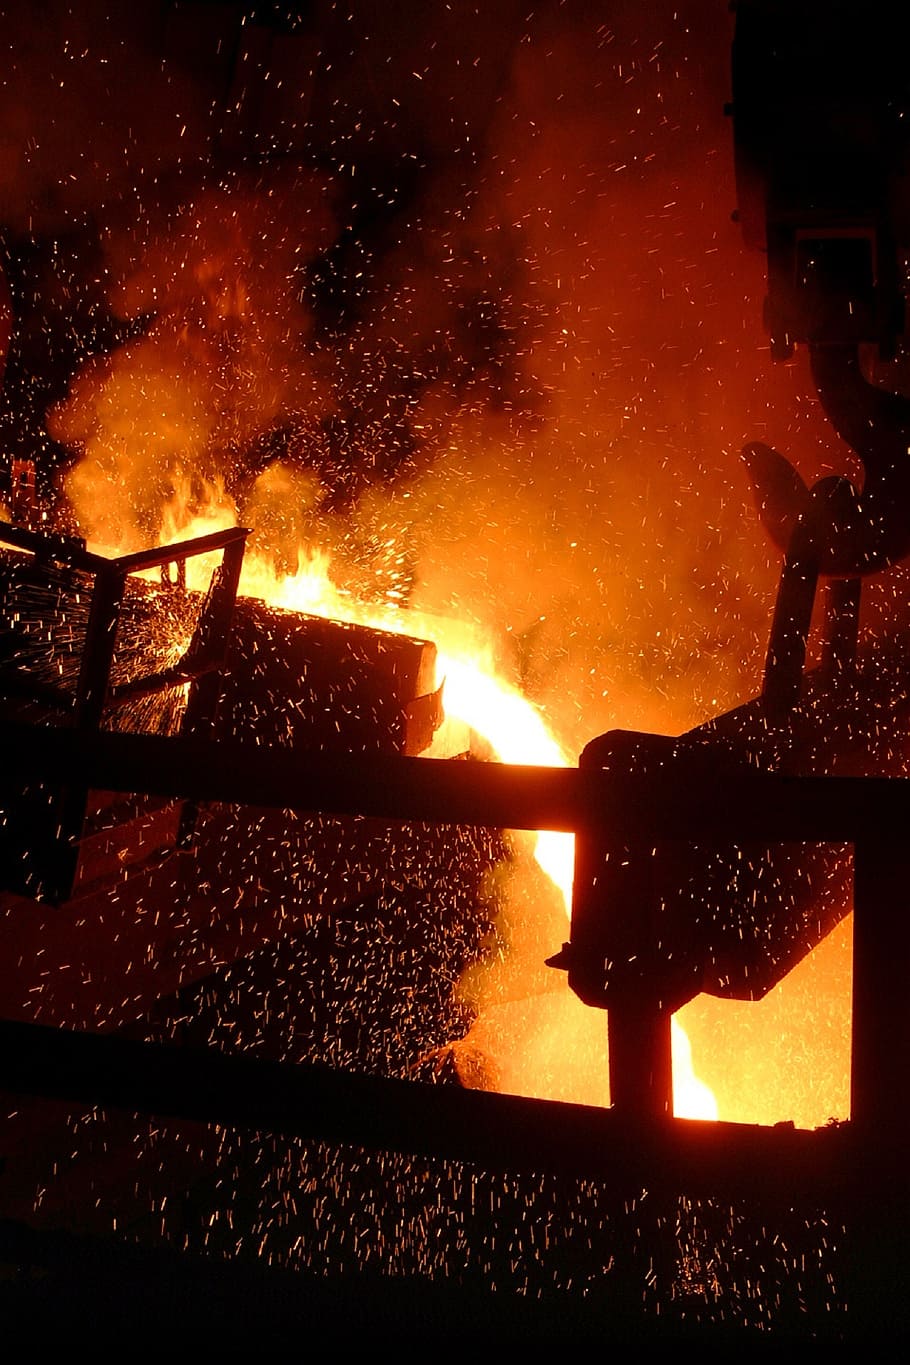 fire burning during nighttime, steel mill, worker, foundry, metal